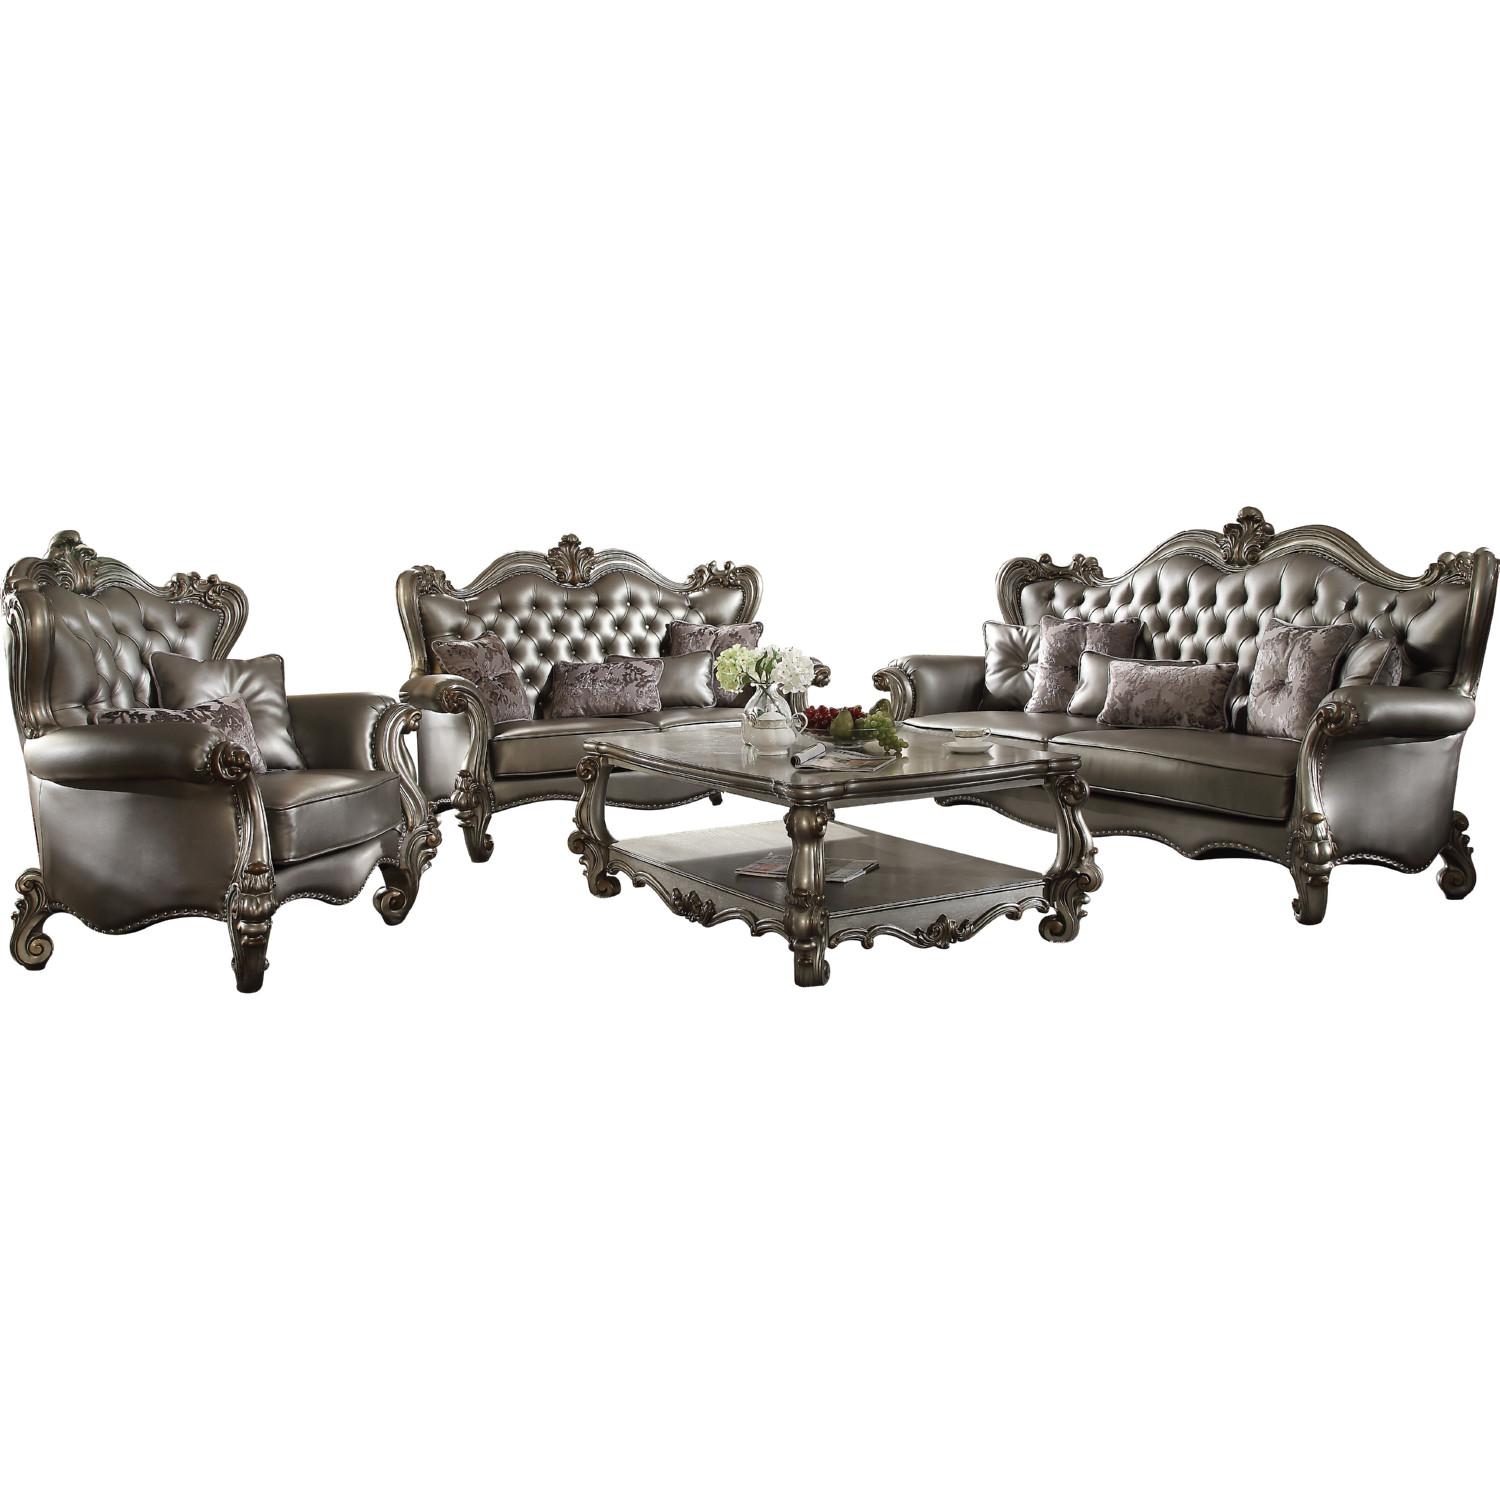 Traditional,  Vintage Sofa Loveseat Chair Versailles-56820 Versailles-56820-Set-3 in Platinum, Antique, Silver Faux Leather